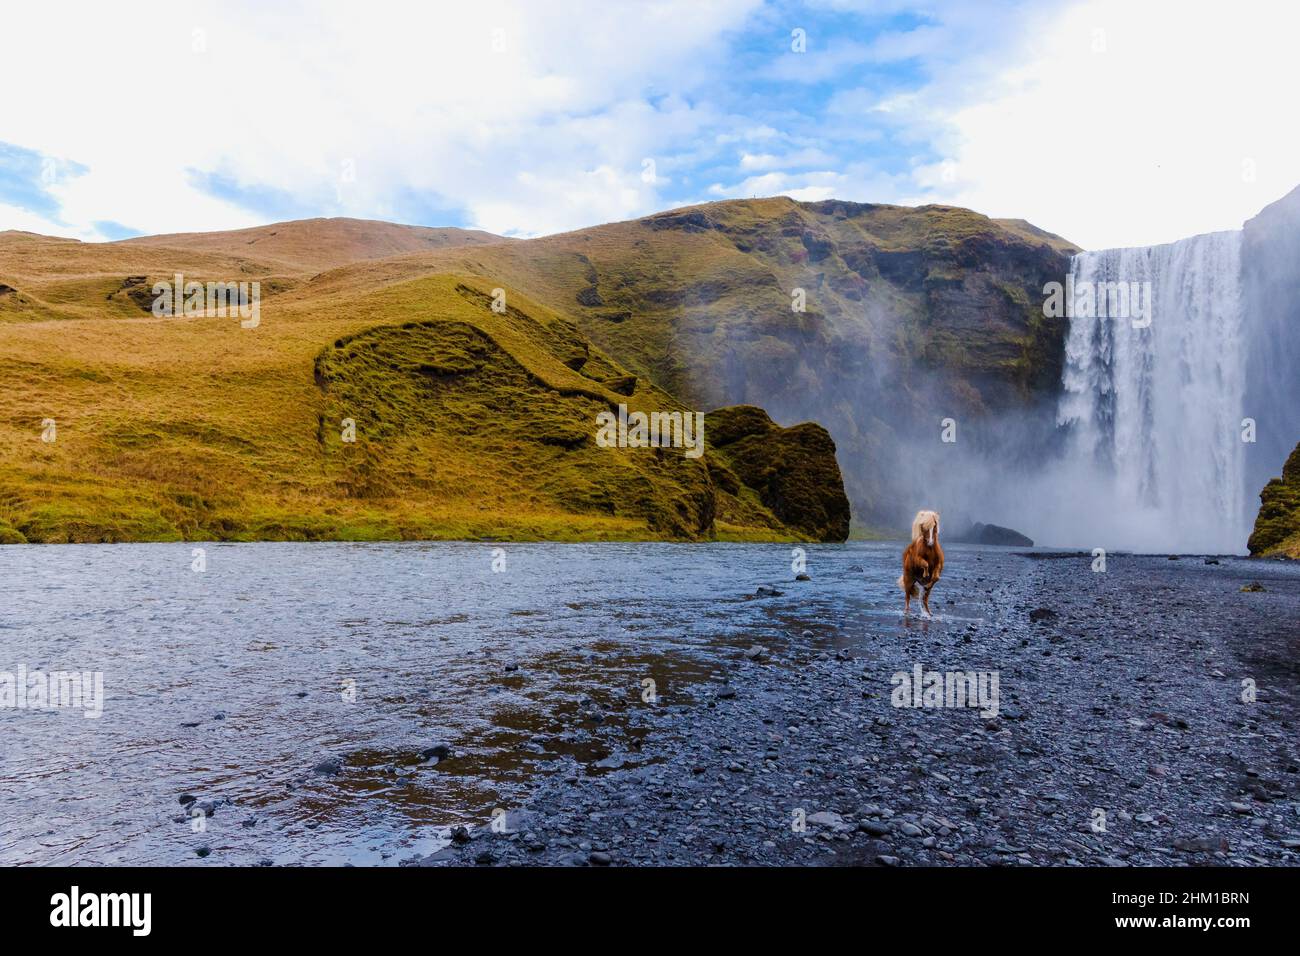 Skógafoss waterfall with an Icelandic horse in Iceland, a magical natural wonder Stock Photo